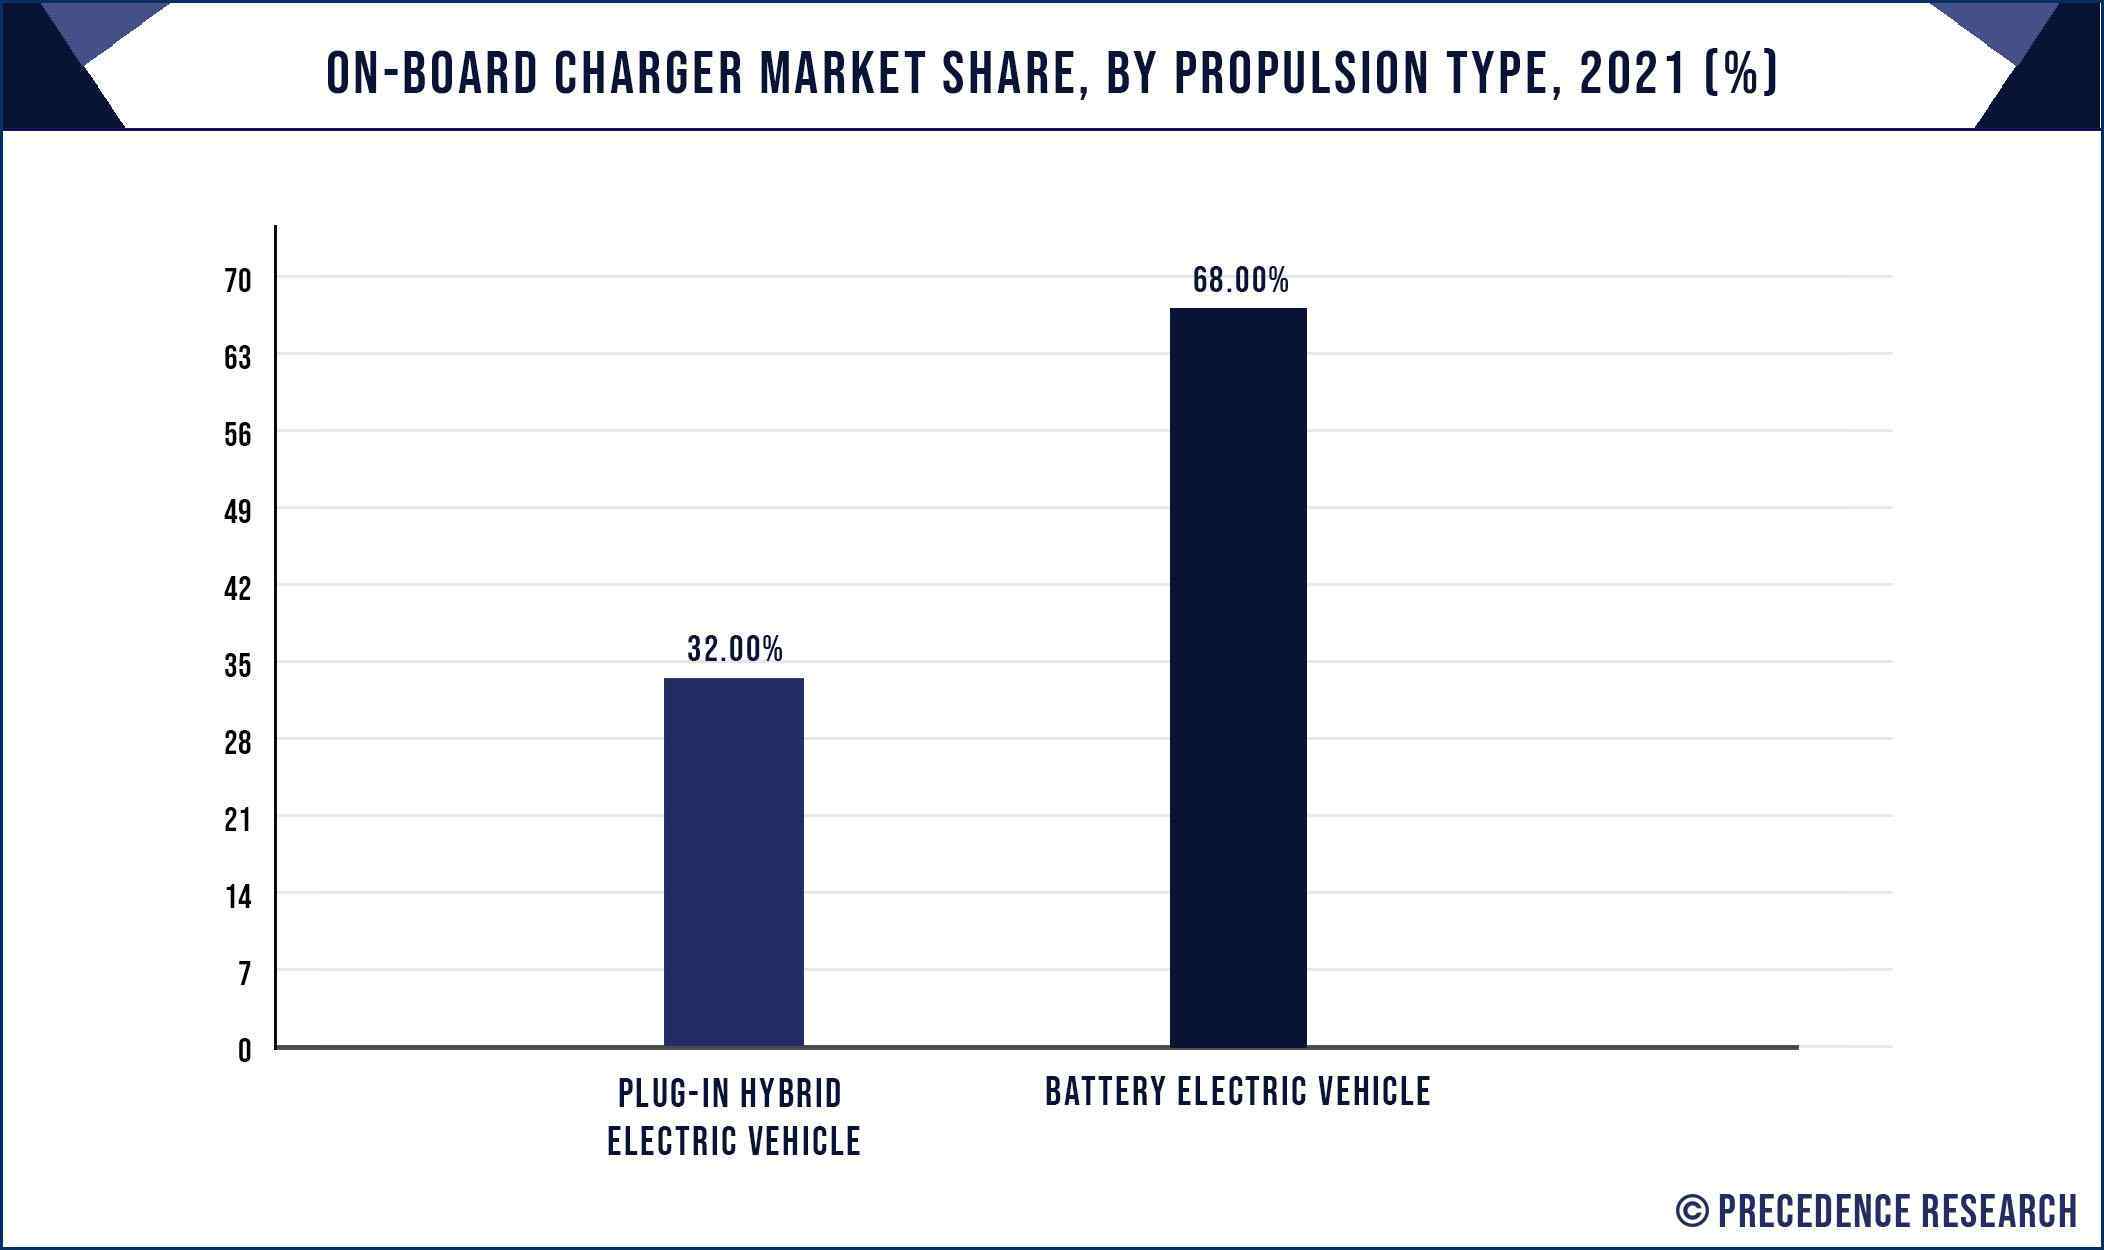 On Board Charger Market Share, By Propulsion Type 2021 (%)